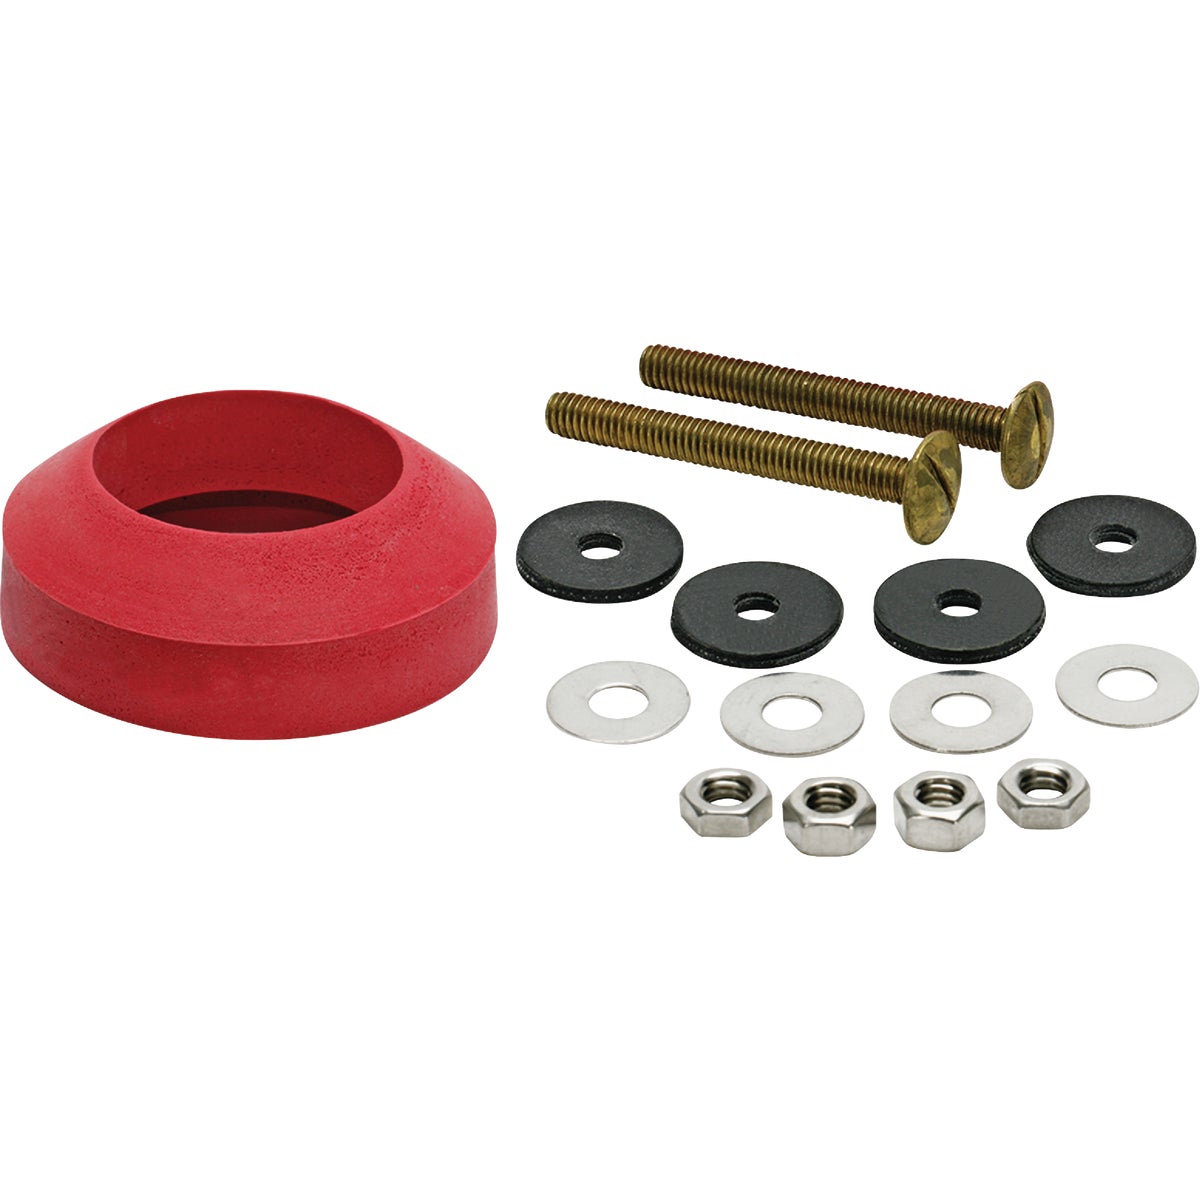 Item 473081, Durable solid brass bolts and universal gasket.